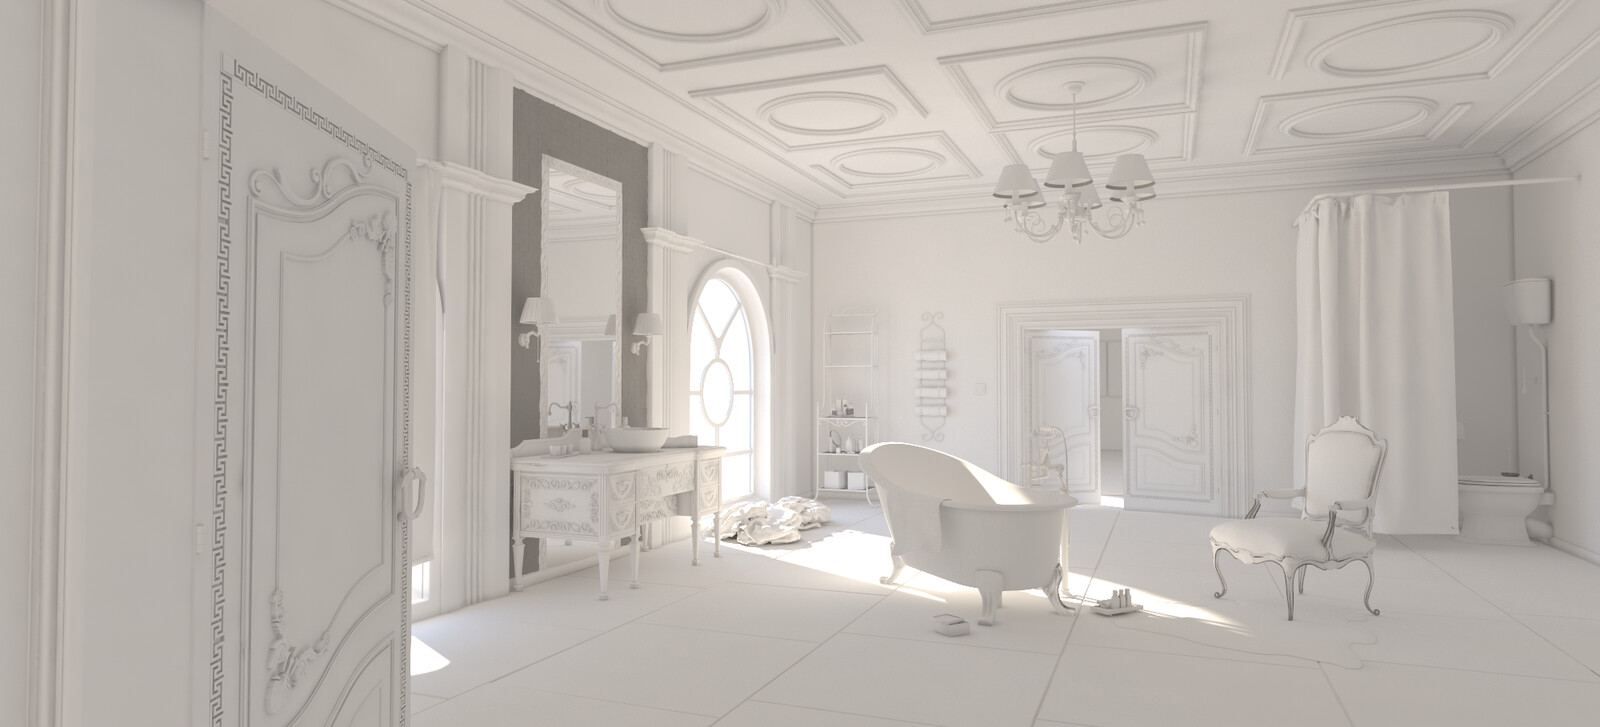 Bathroom in Boho style - ambient occlusion